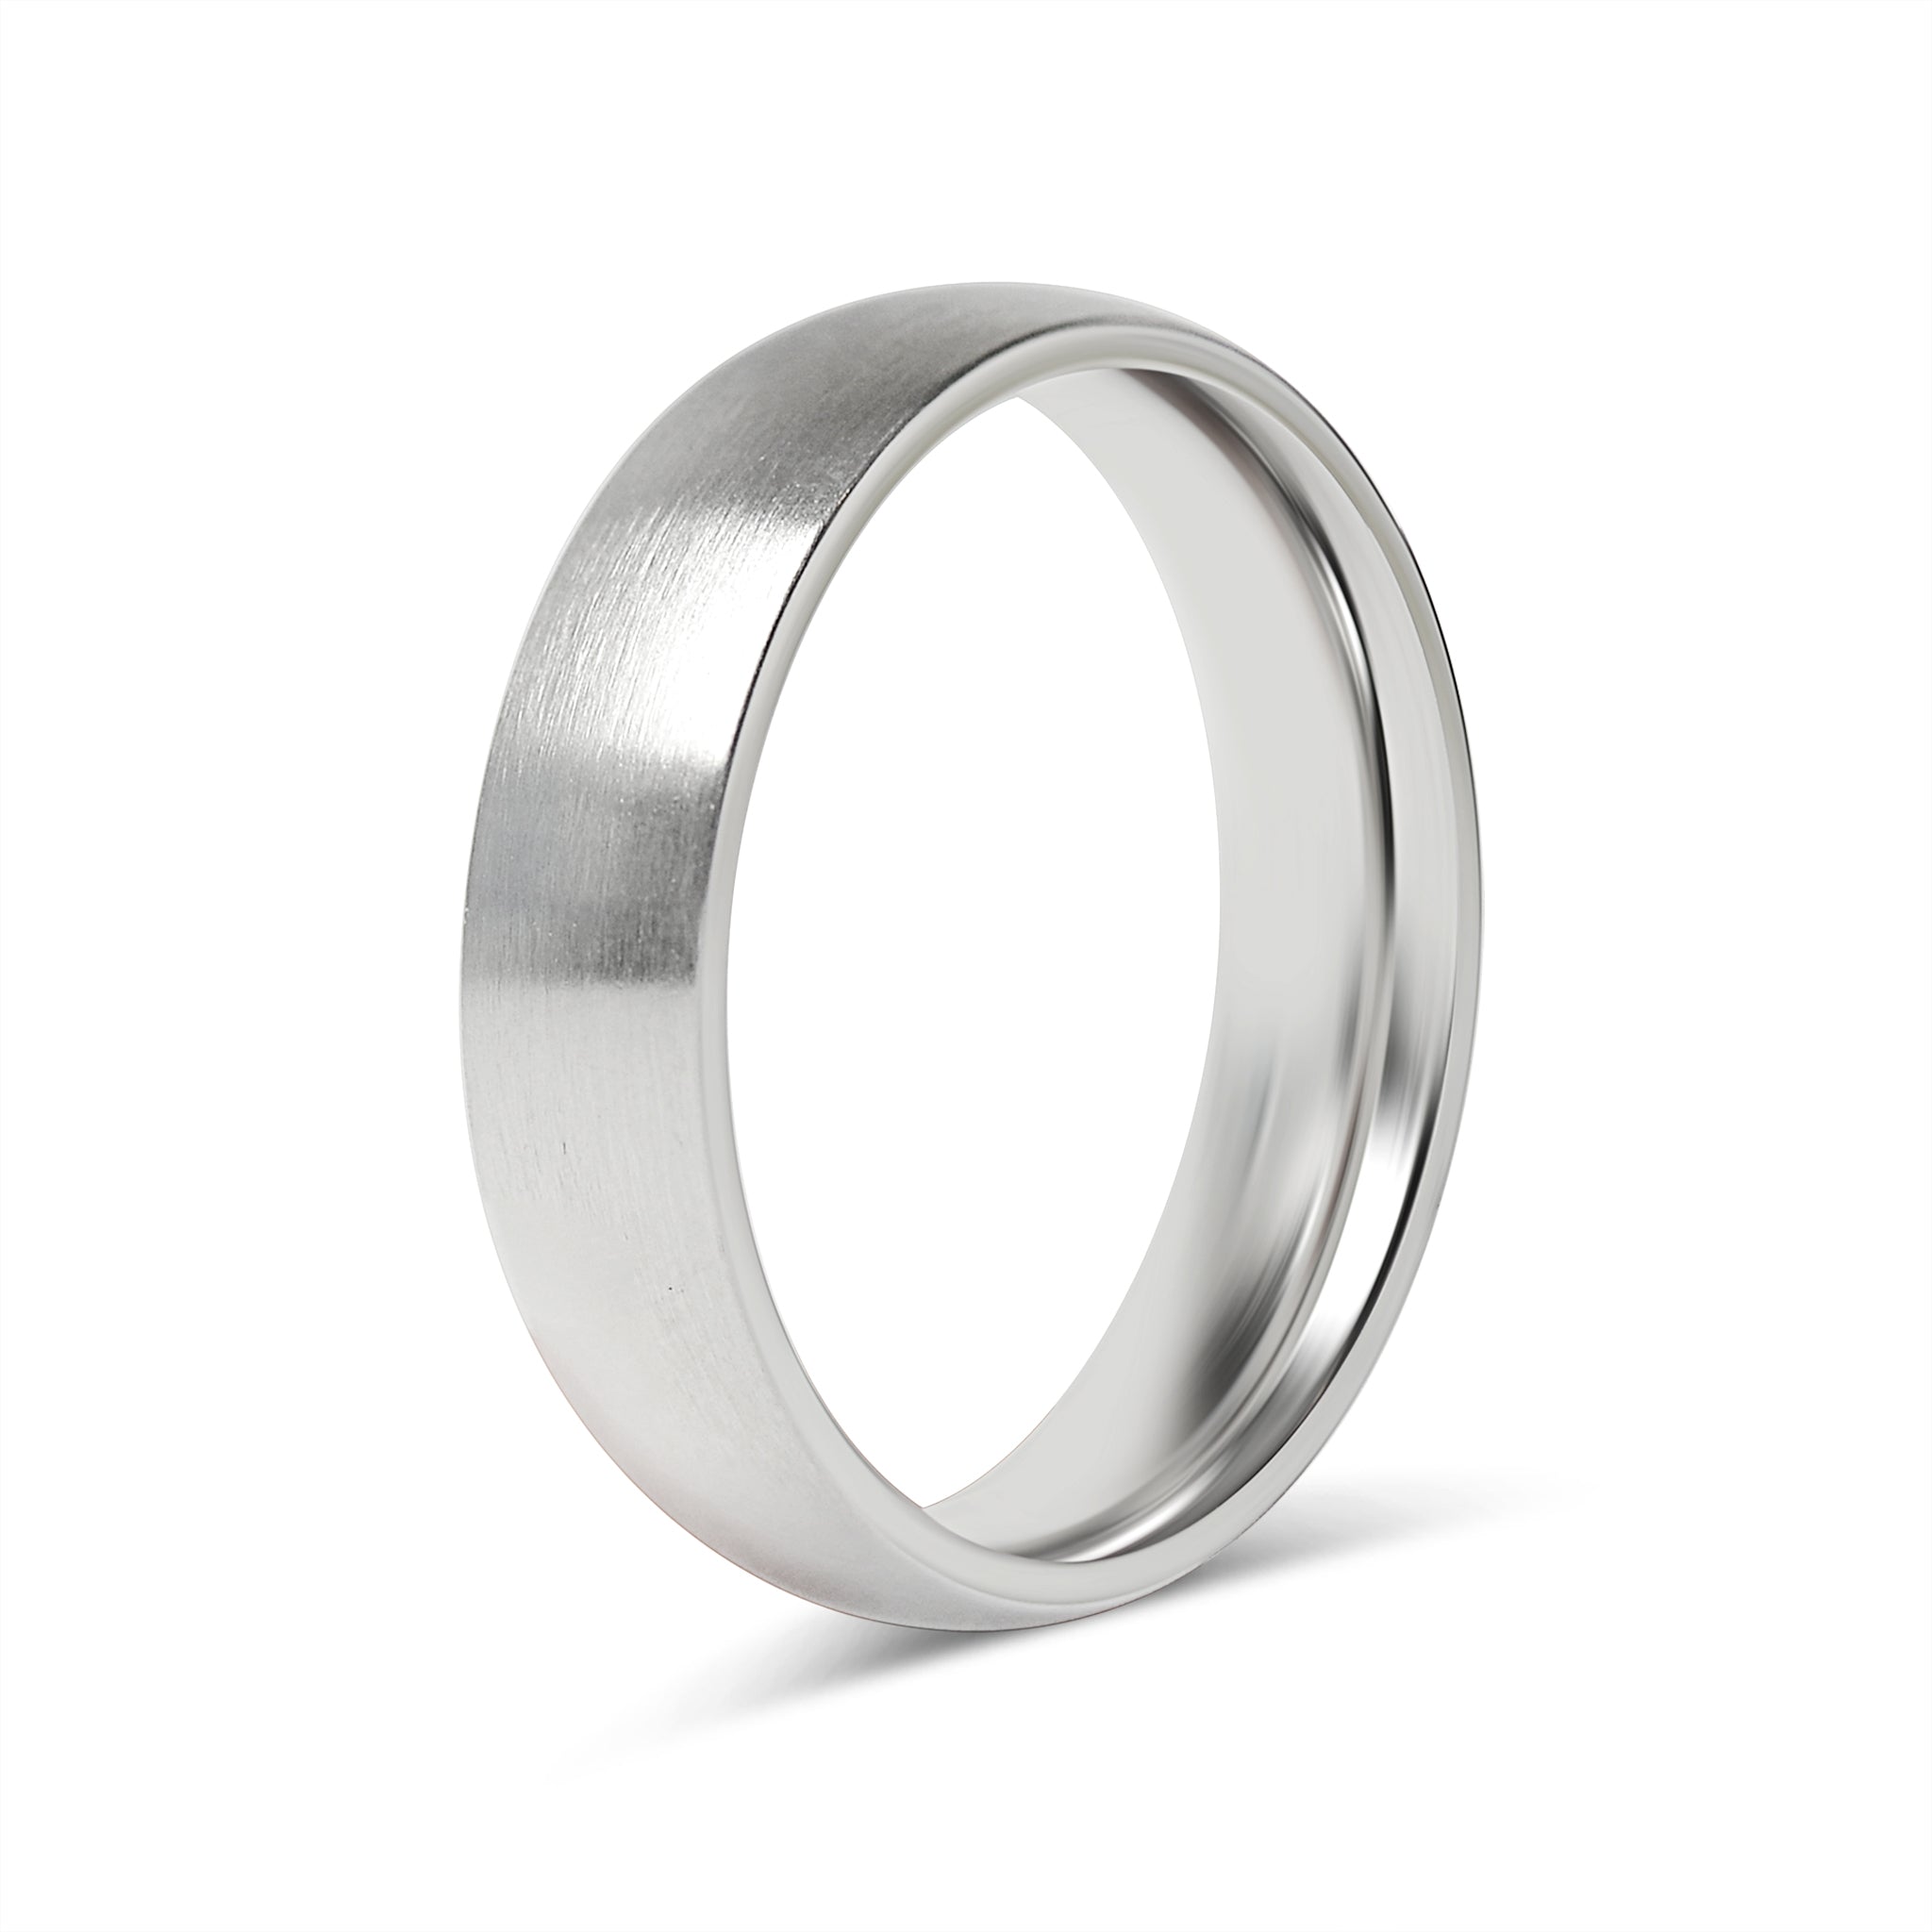 Rings Polished Stainless Steel Blank Ring Scr3055 10 Wholesale Jewelry Website 10 Unisex